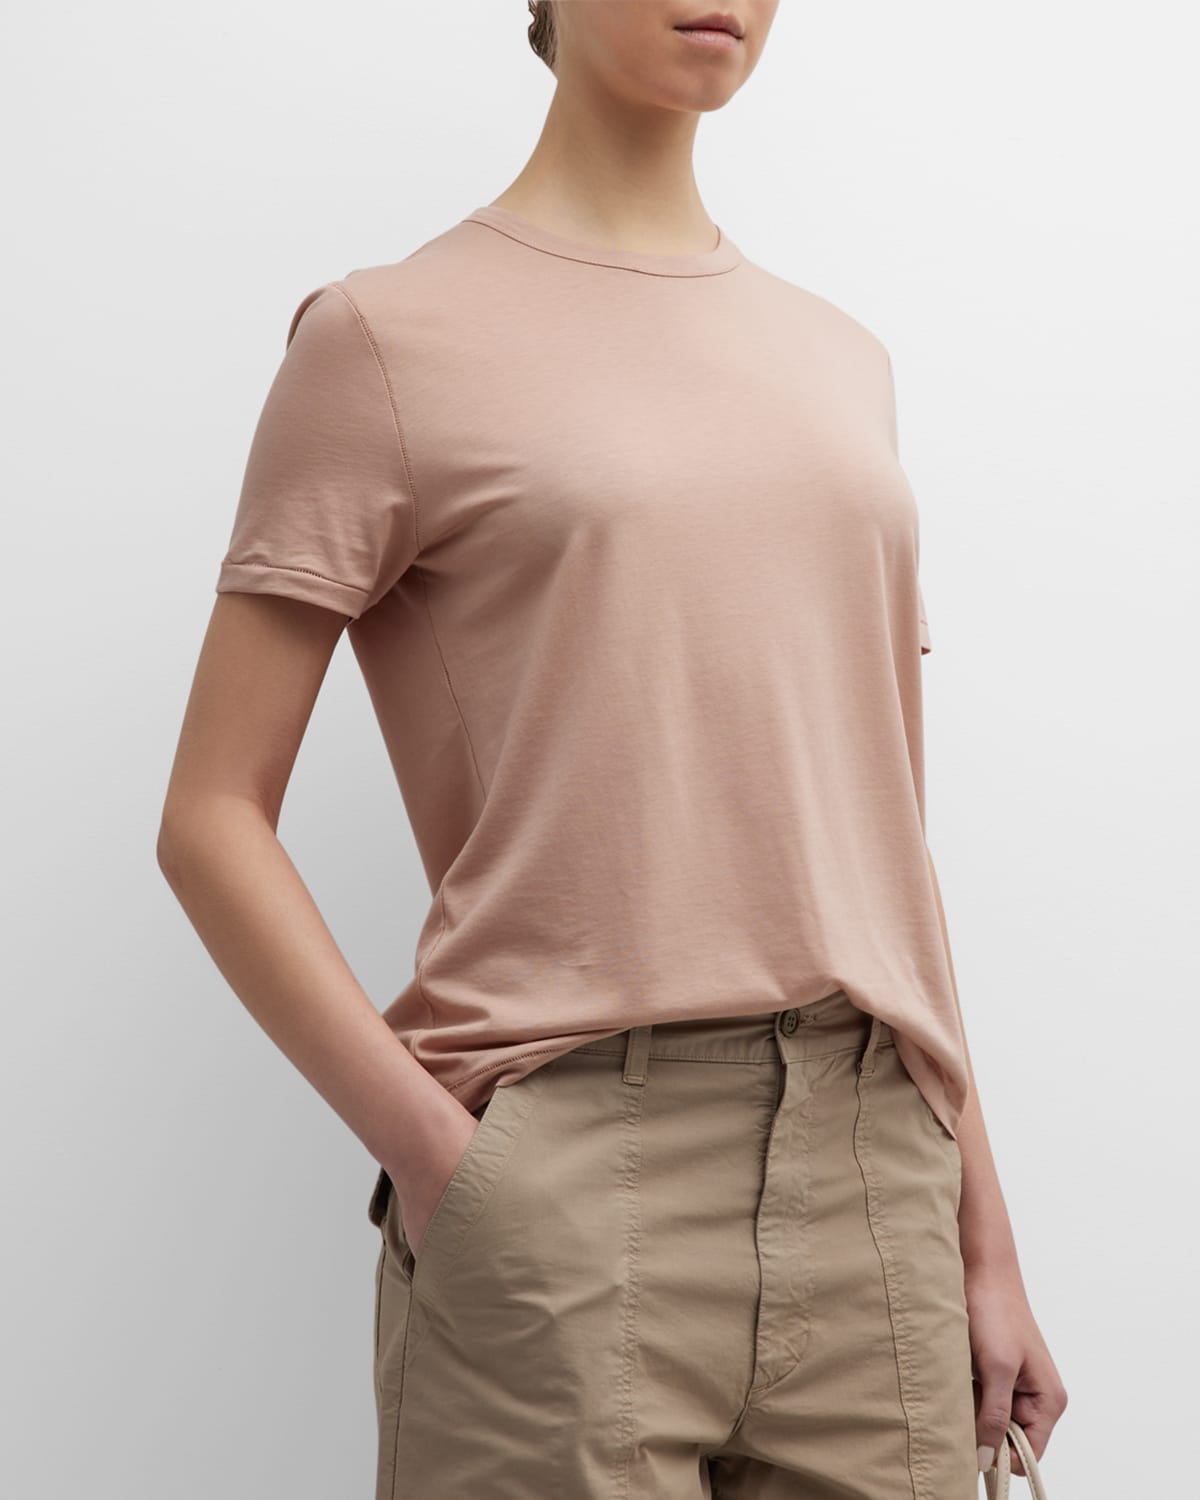 Majestic Lyocell Cotton Semi-relaxed Short-sleeve Crewneck Tee In Rose The